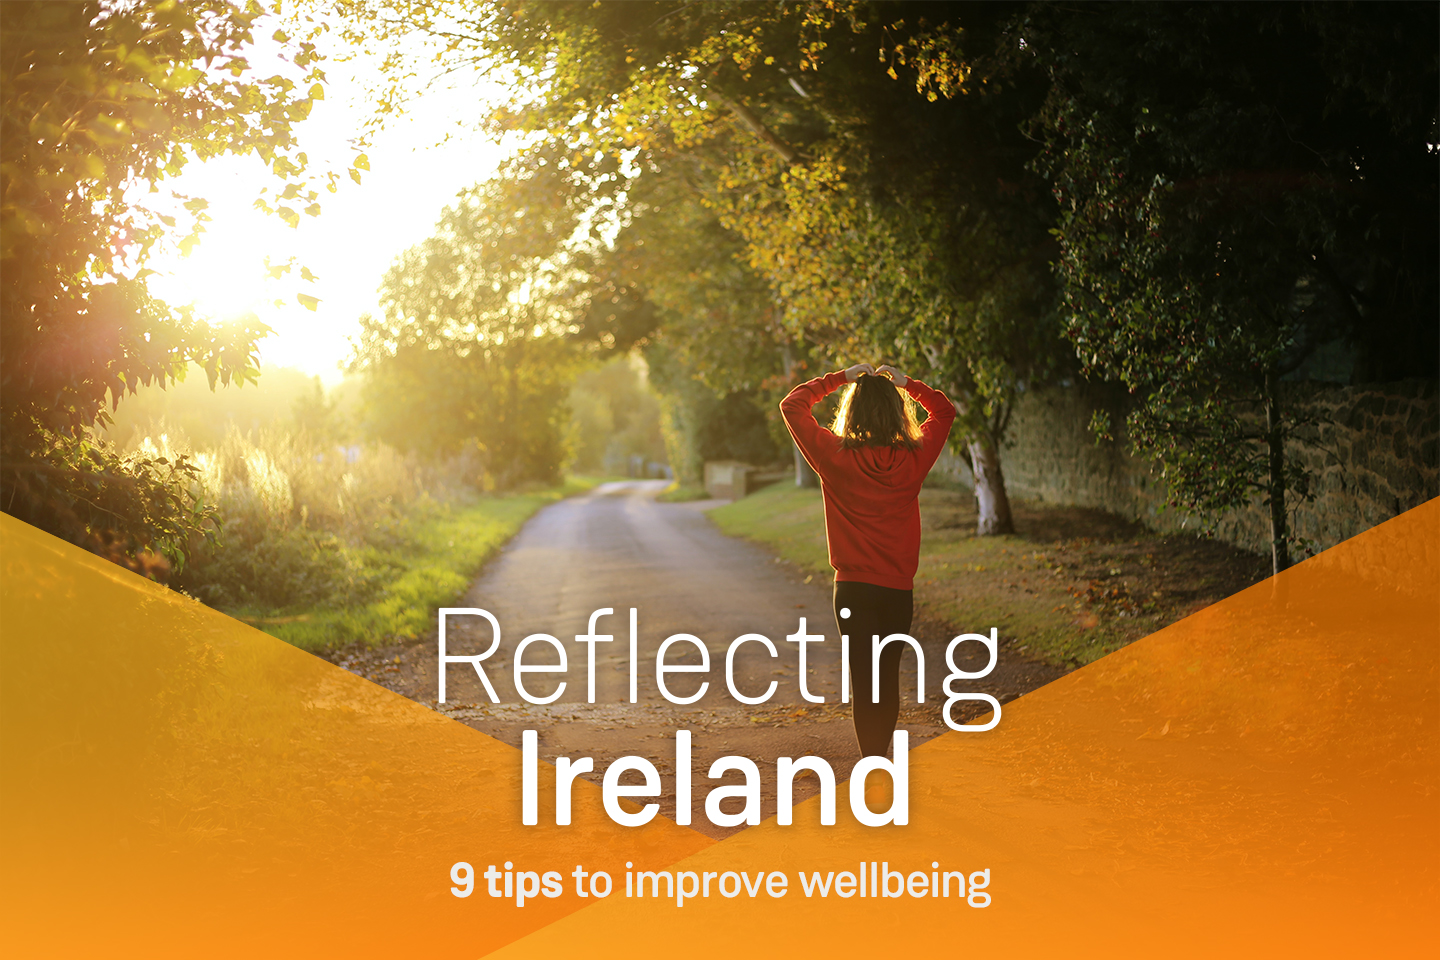 Reflecting Ireland: 9 tips to improve wellbeing – based on behavioural science